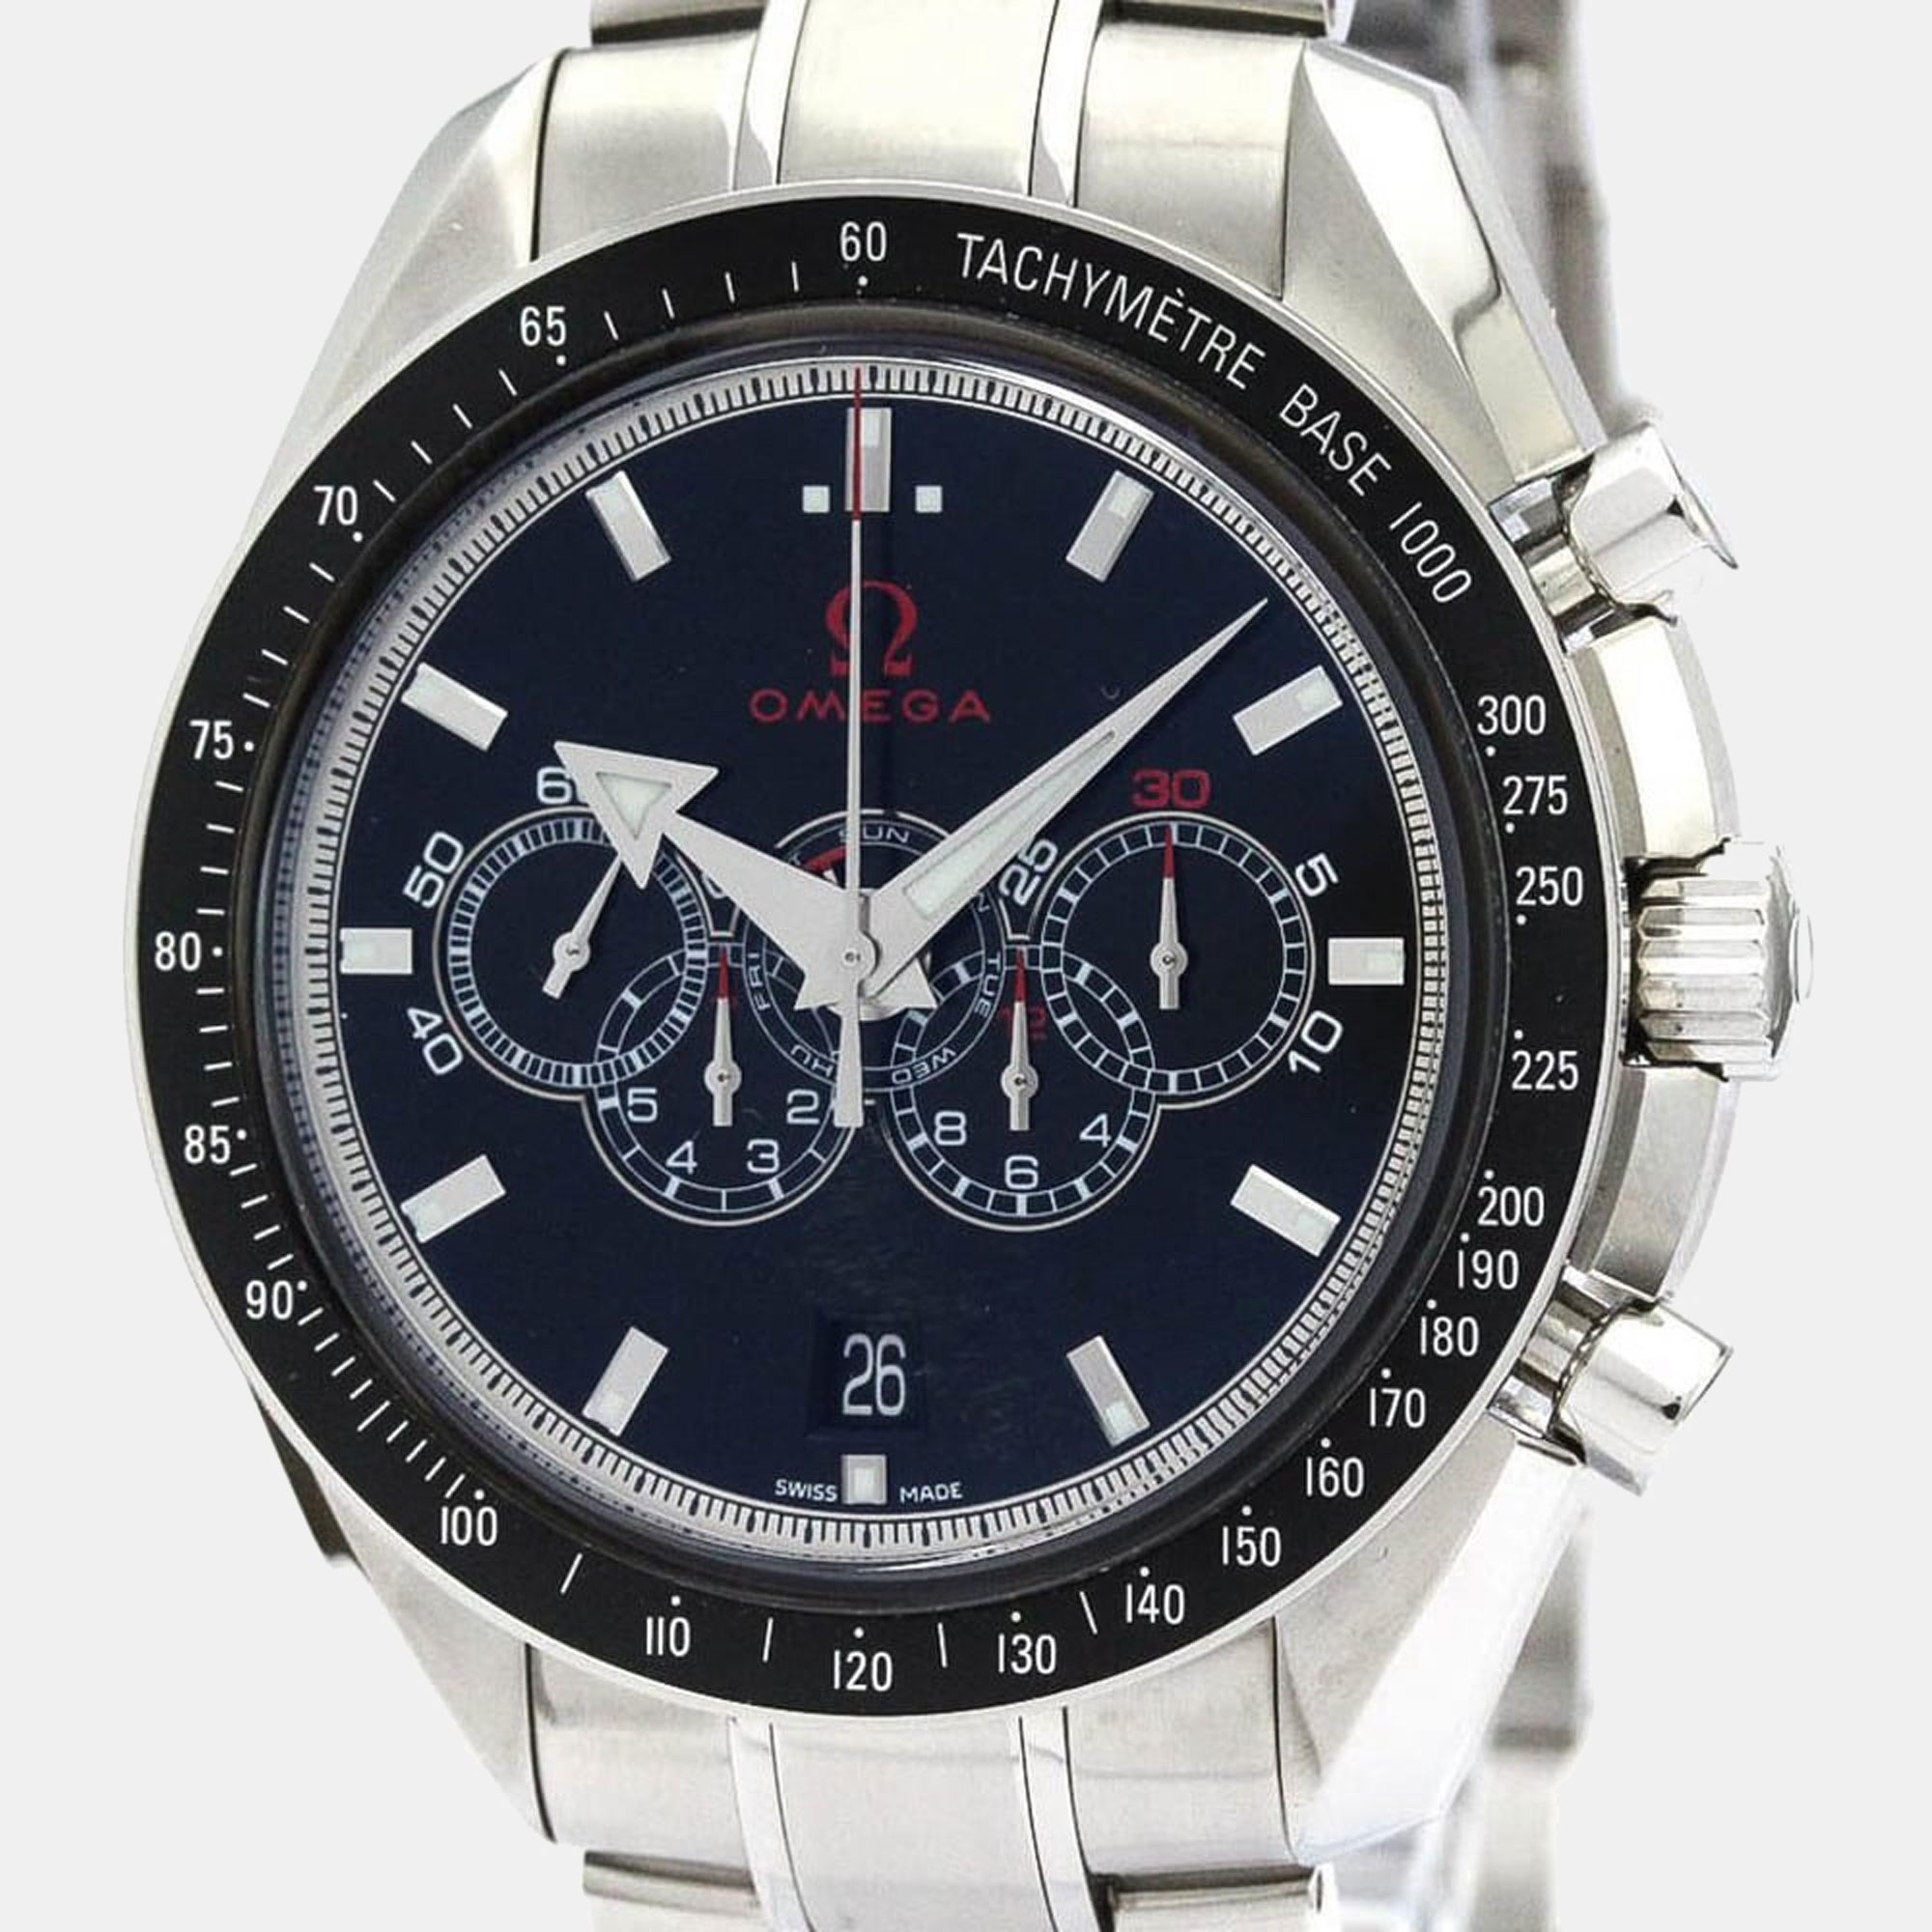 Omega Black Stainless Steel Speedmaster Olympic Limited Edition 321.30.44.52.01.001 Men's Wristwatch 44 Mm